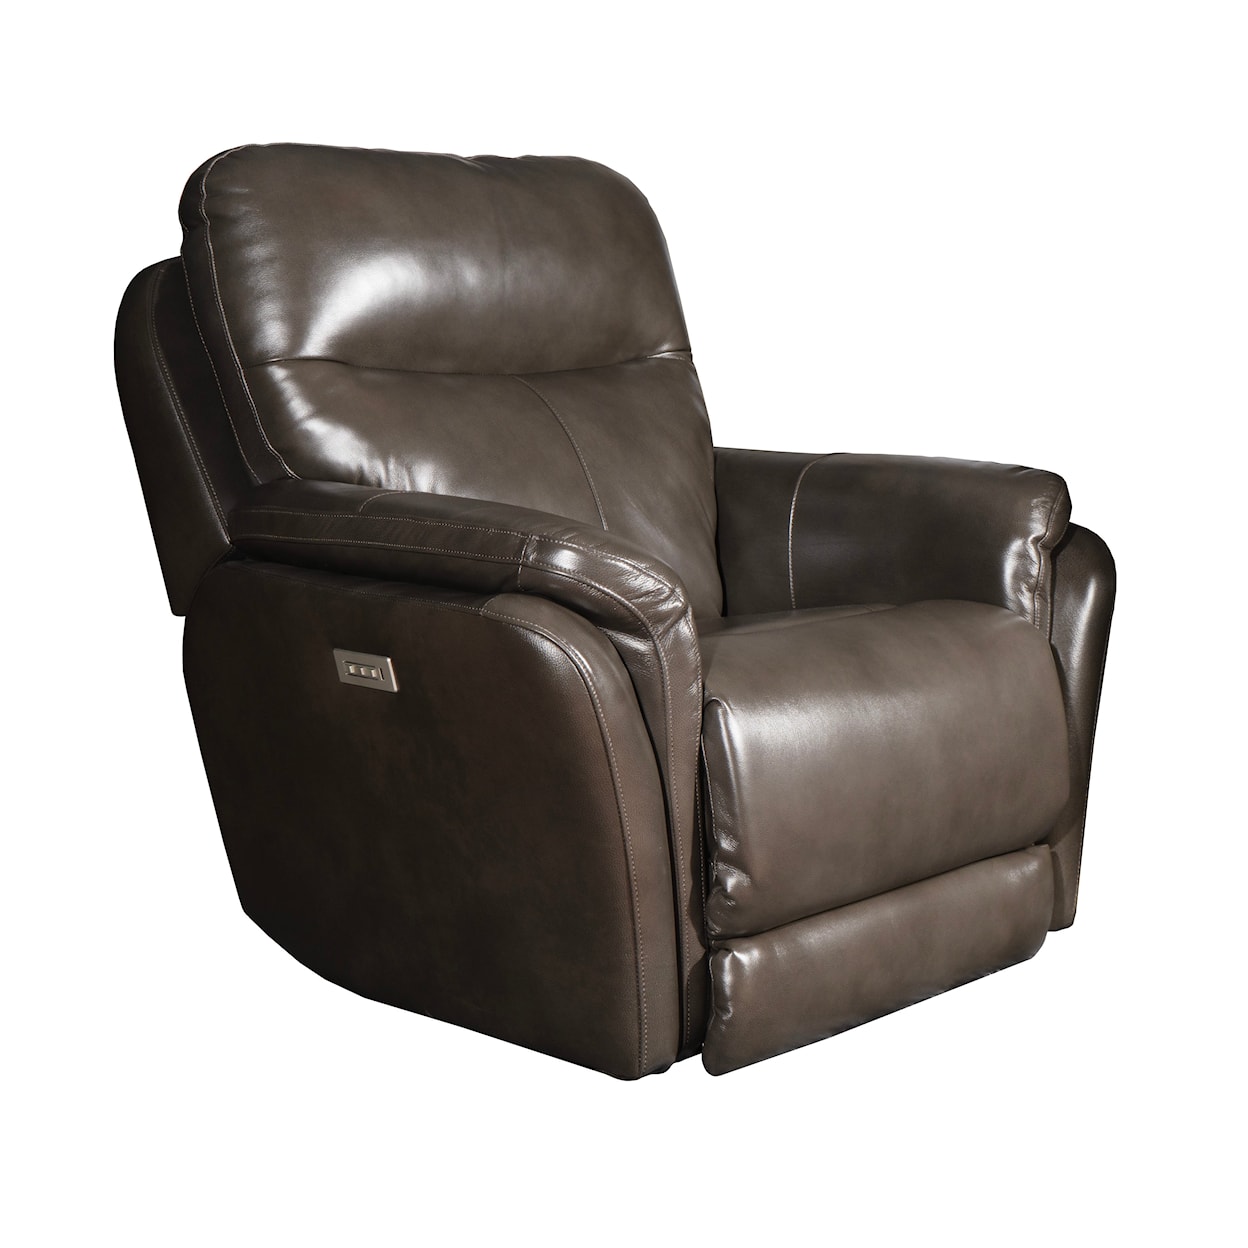 Sunset Home 725 Power Recliner with Headrest and Lumbar